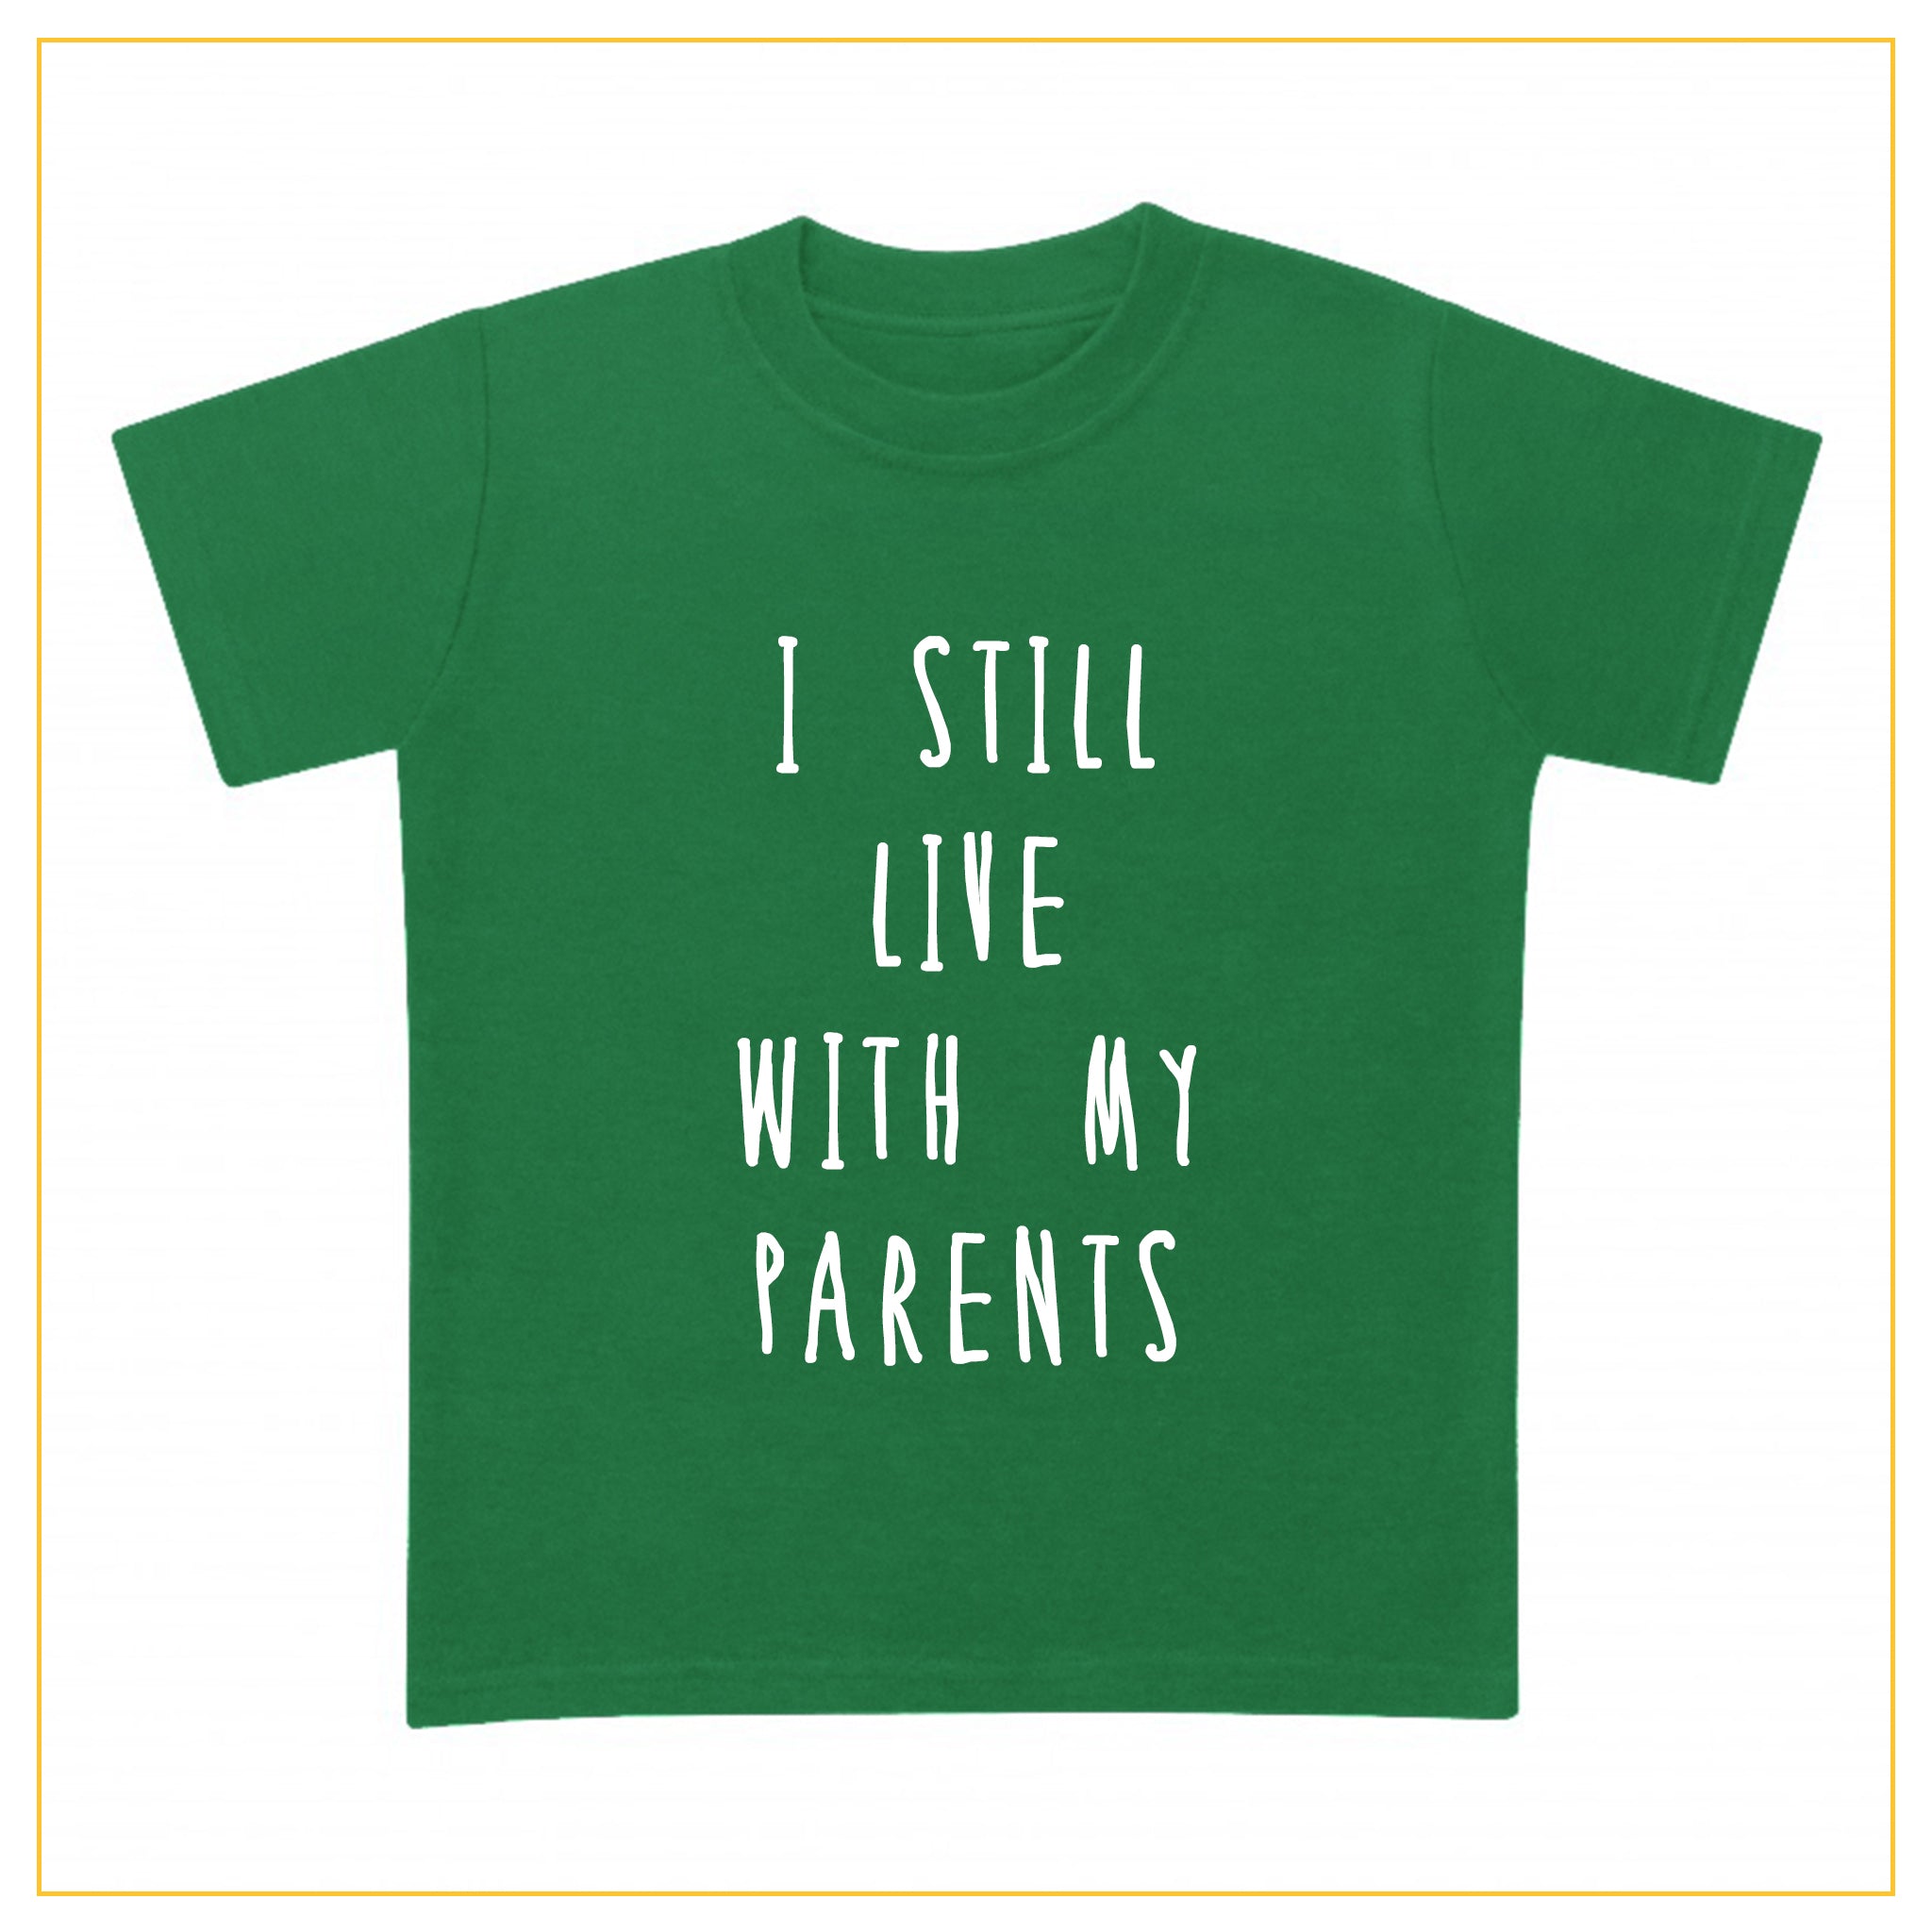 I still live with my parents kids novelty t-shirt in green